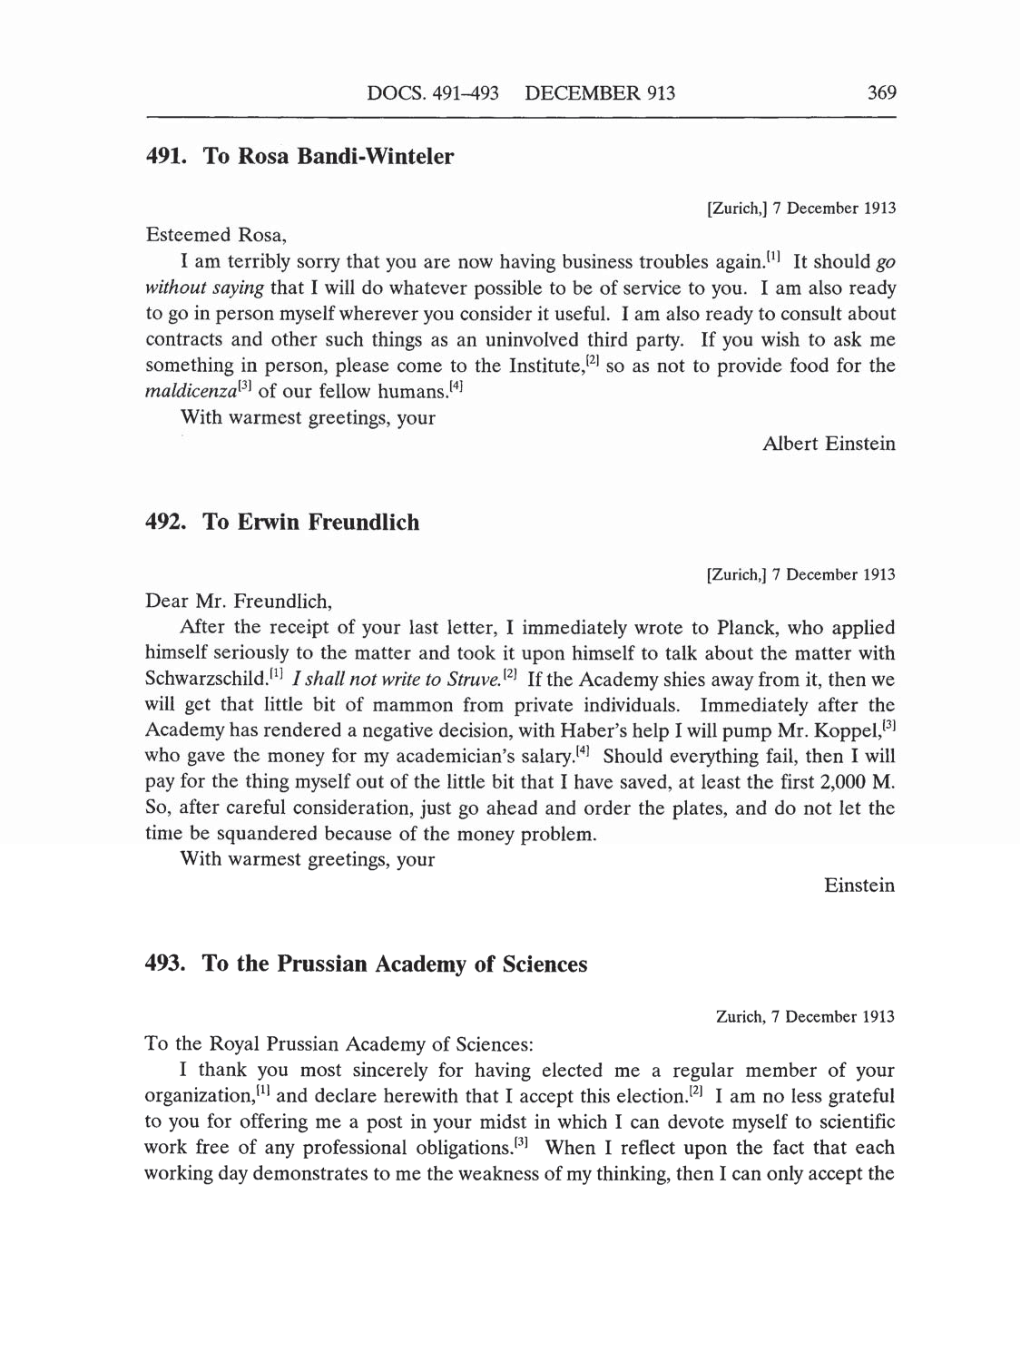 Volume 5: The Swiss Years: Correspondence, 1902-1914 (English translation supplement) page 369